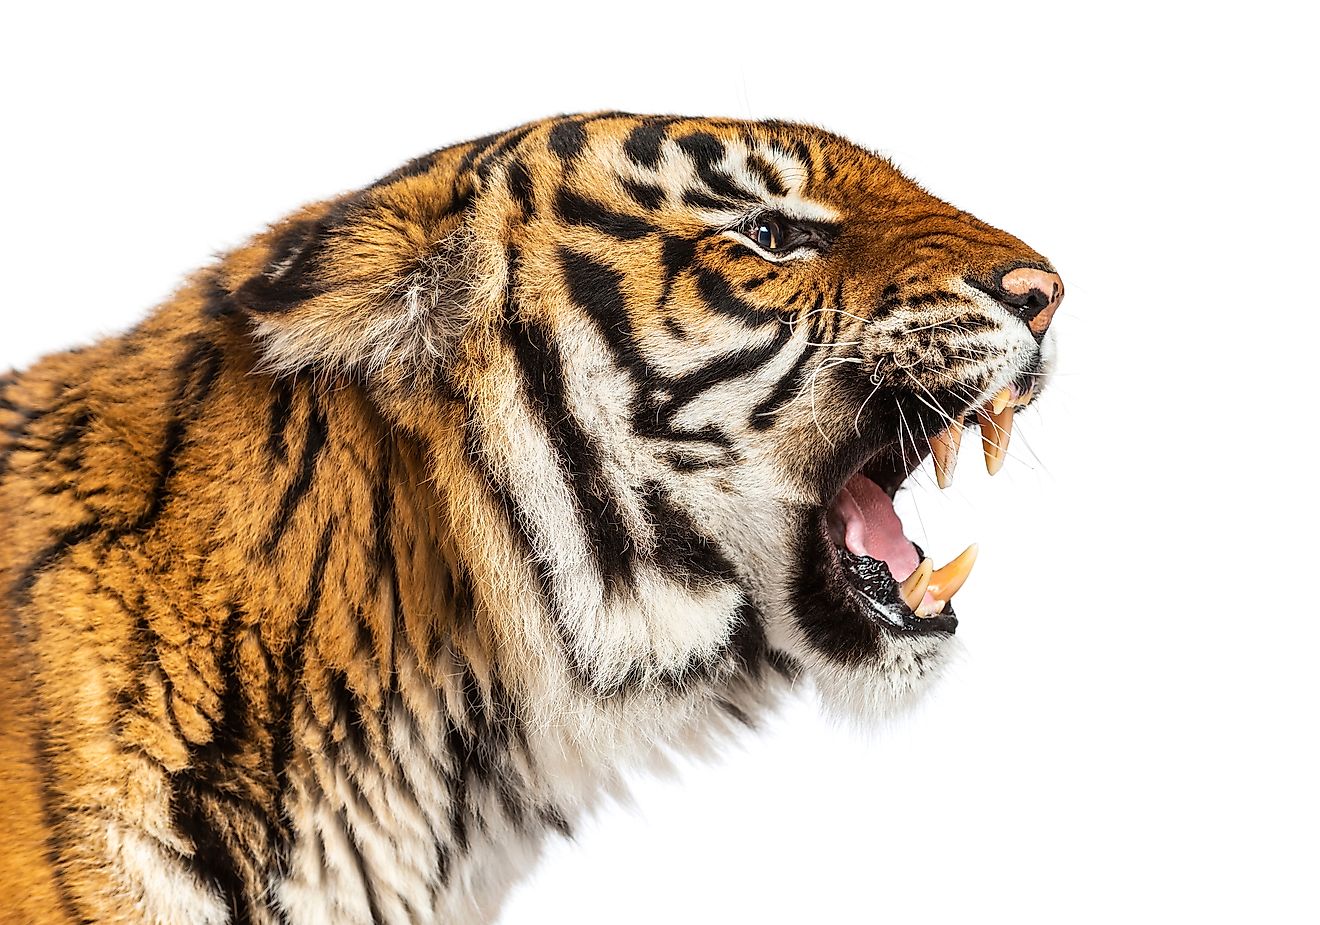 The tiger is a hypercarnivore and apex predator.